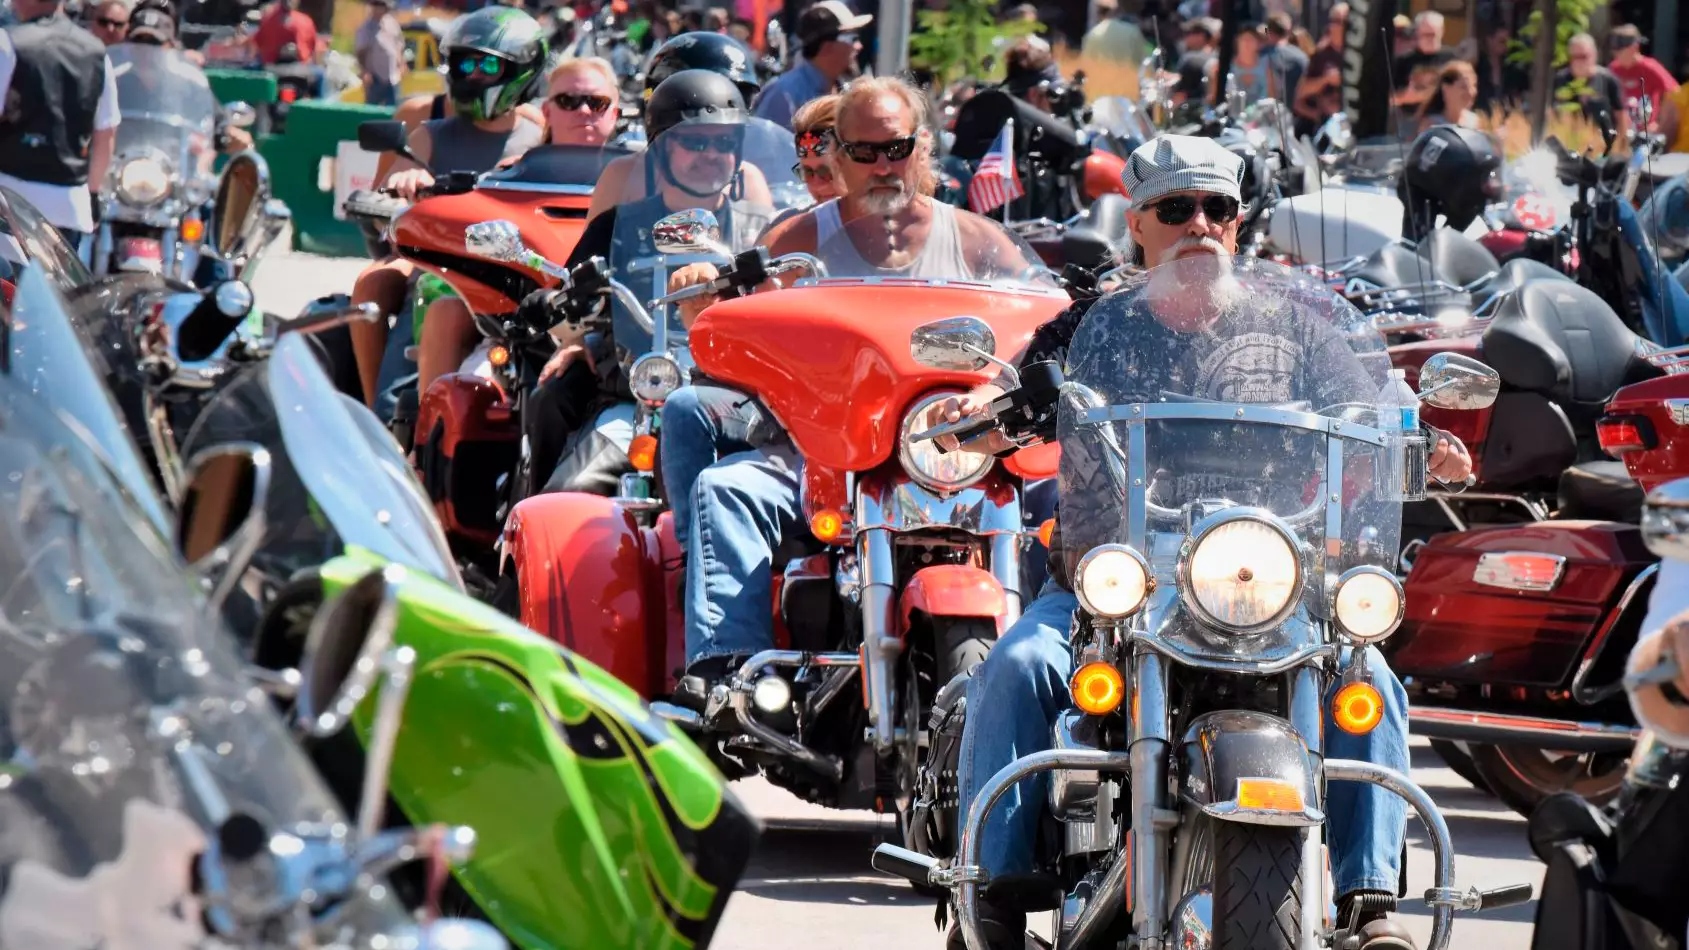 Quarter Of A Million Bikers Defy Coronavirus Fears And Gather For US Rally